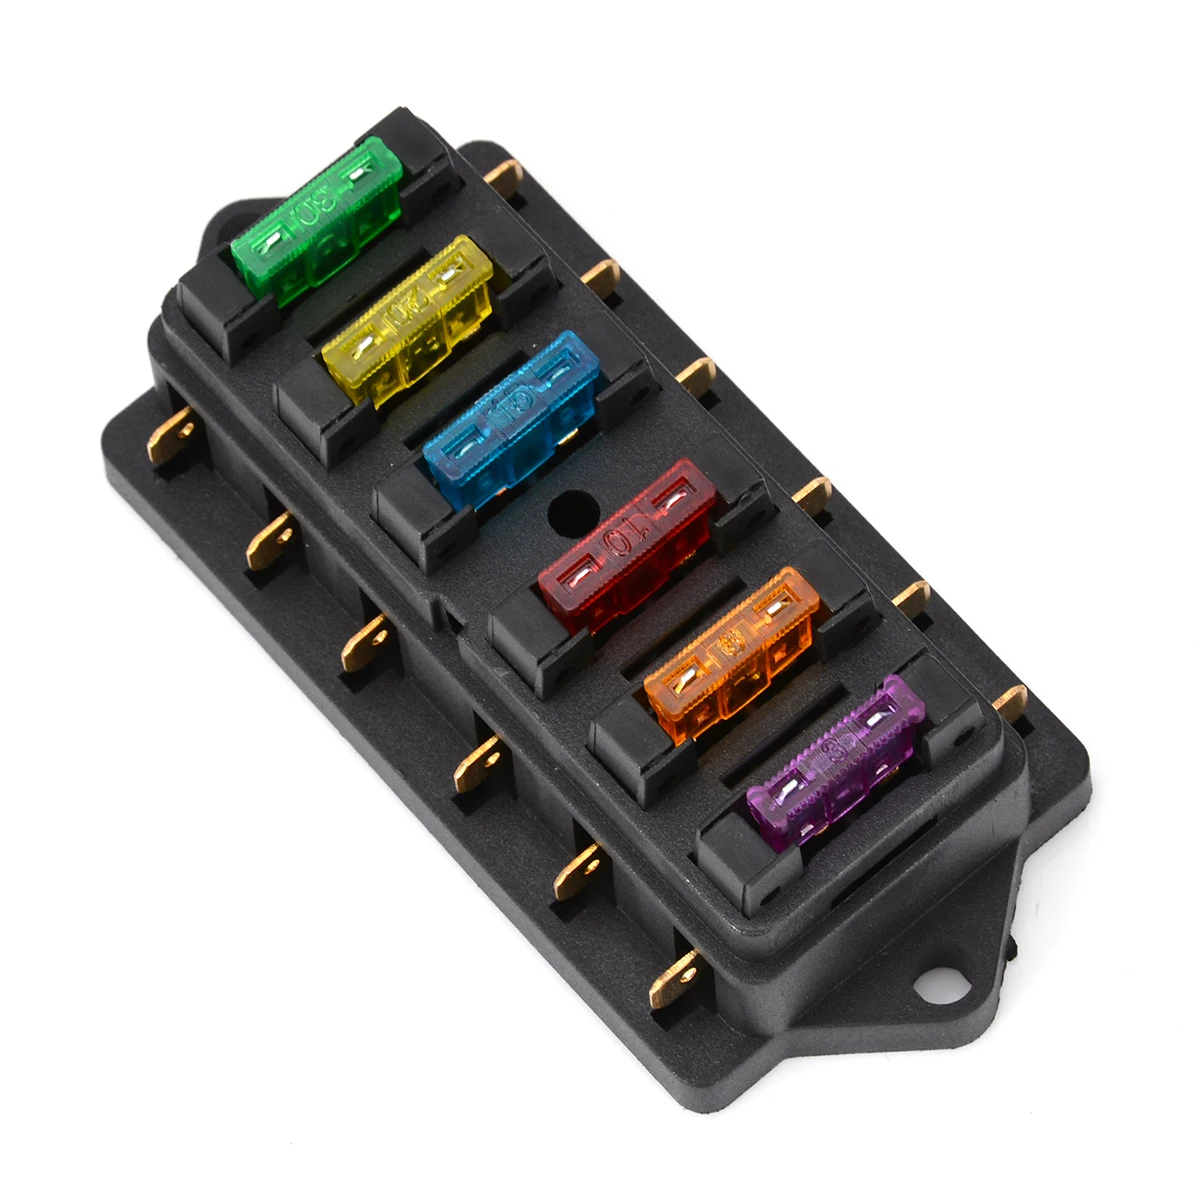 1pc 6.3mm 6 Way Circuit Standard Blade Fuse Holder DC12V/24V with 6 Fuses For Auto Car Accessories